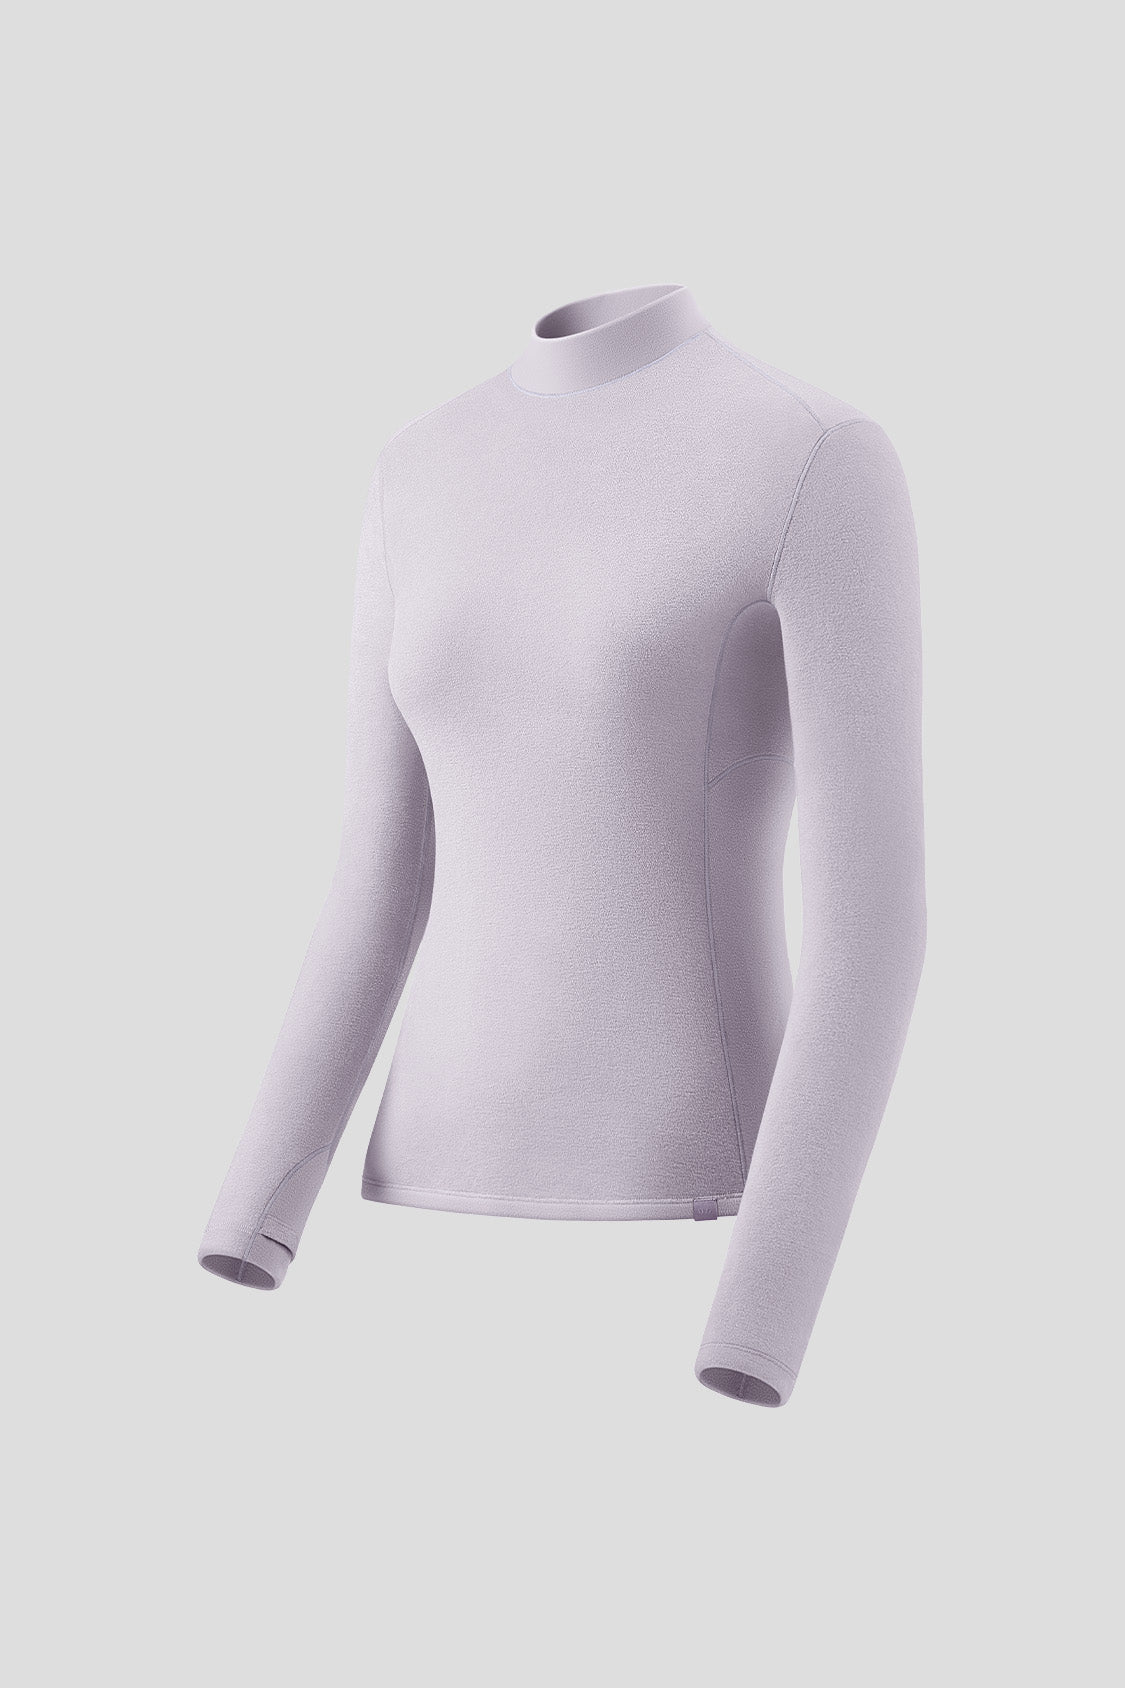  Womens Thermal Long Sleeve Tops, Mock Turtle & Crew Neck  Shirts, Fleece Lined Compression Base Layer, Mock Neck Heatlock White, X- Small